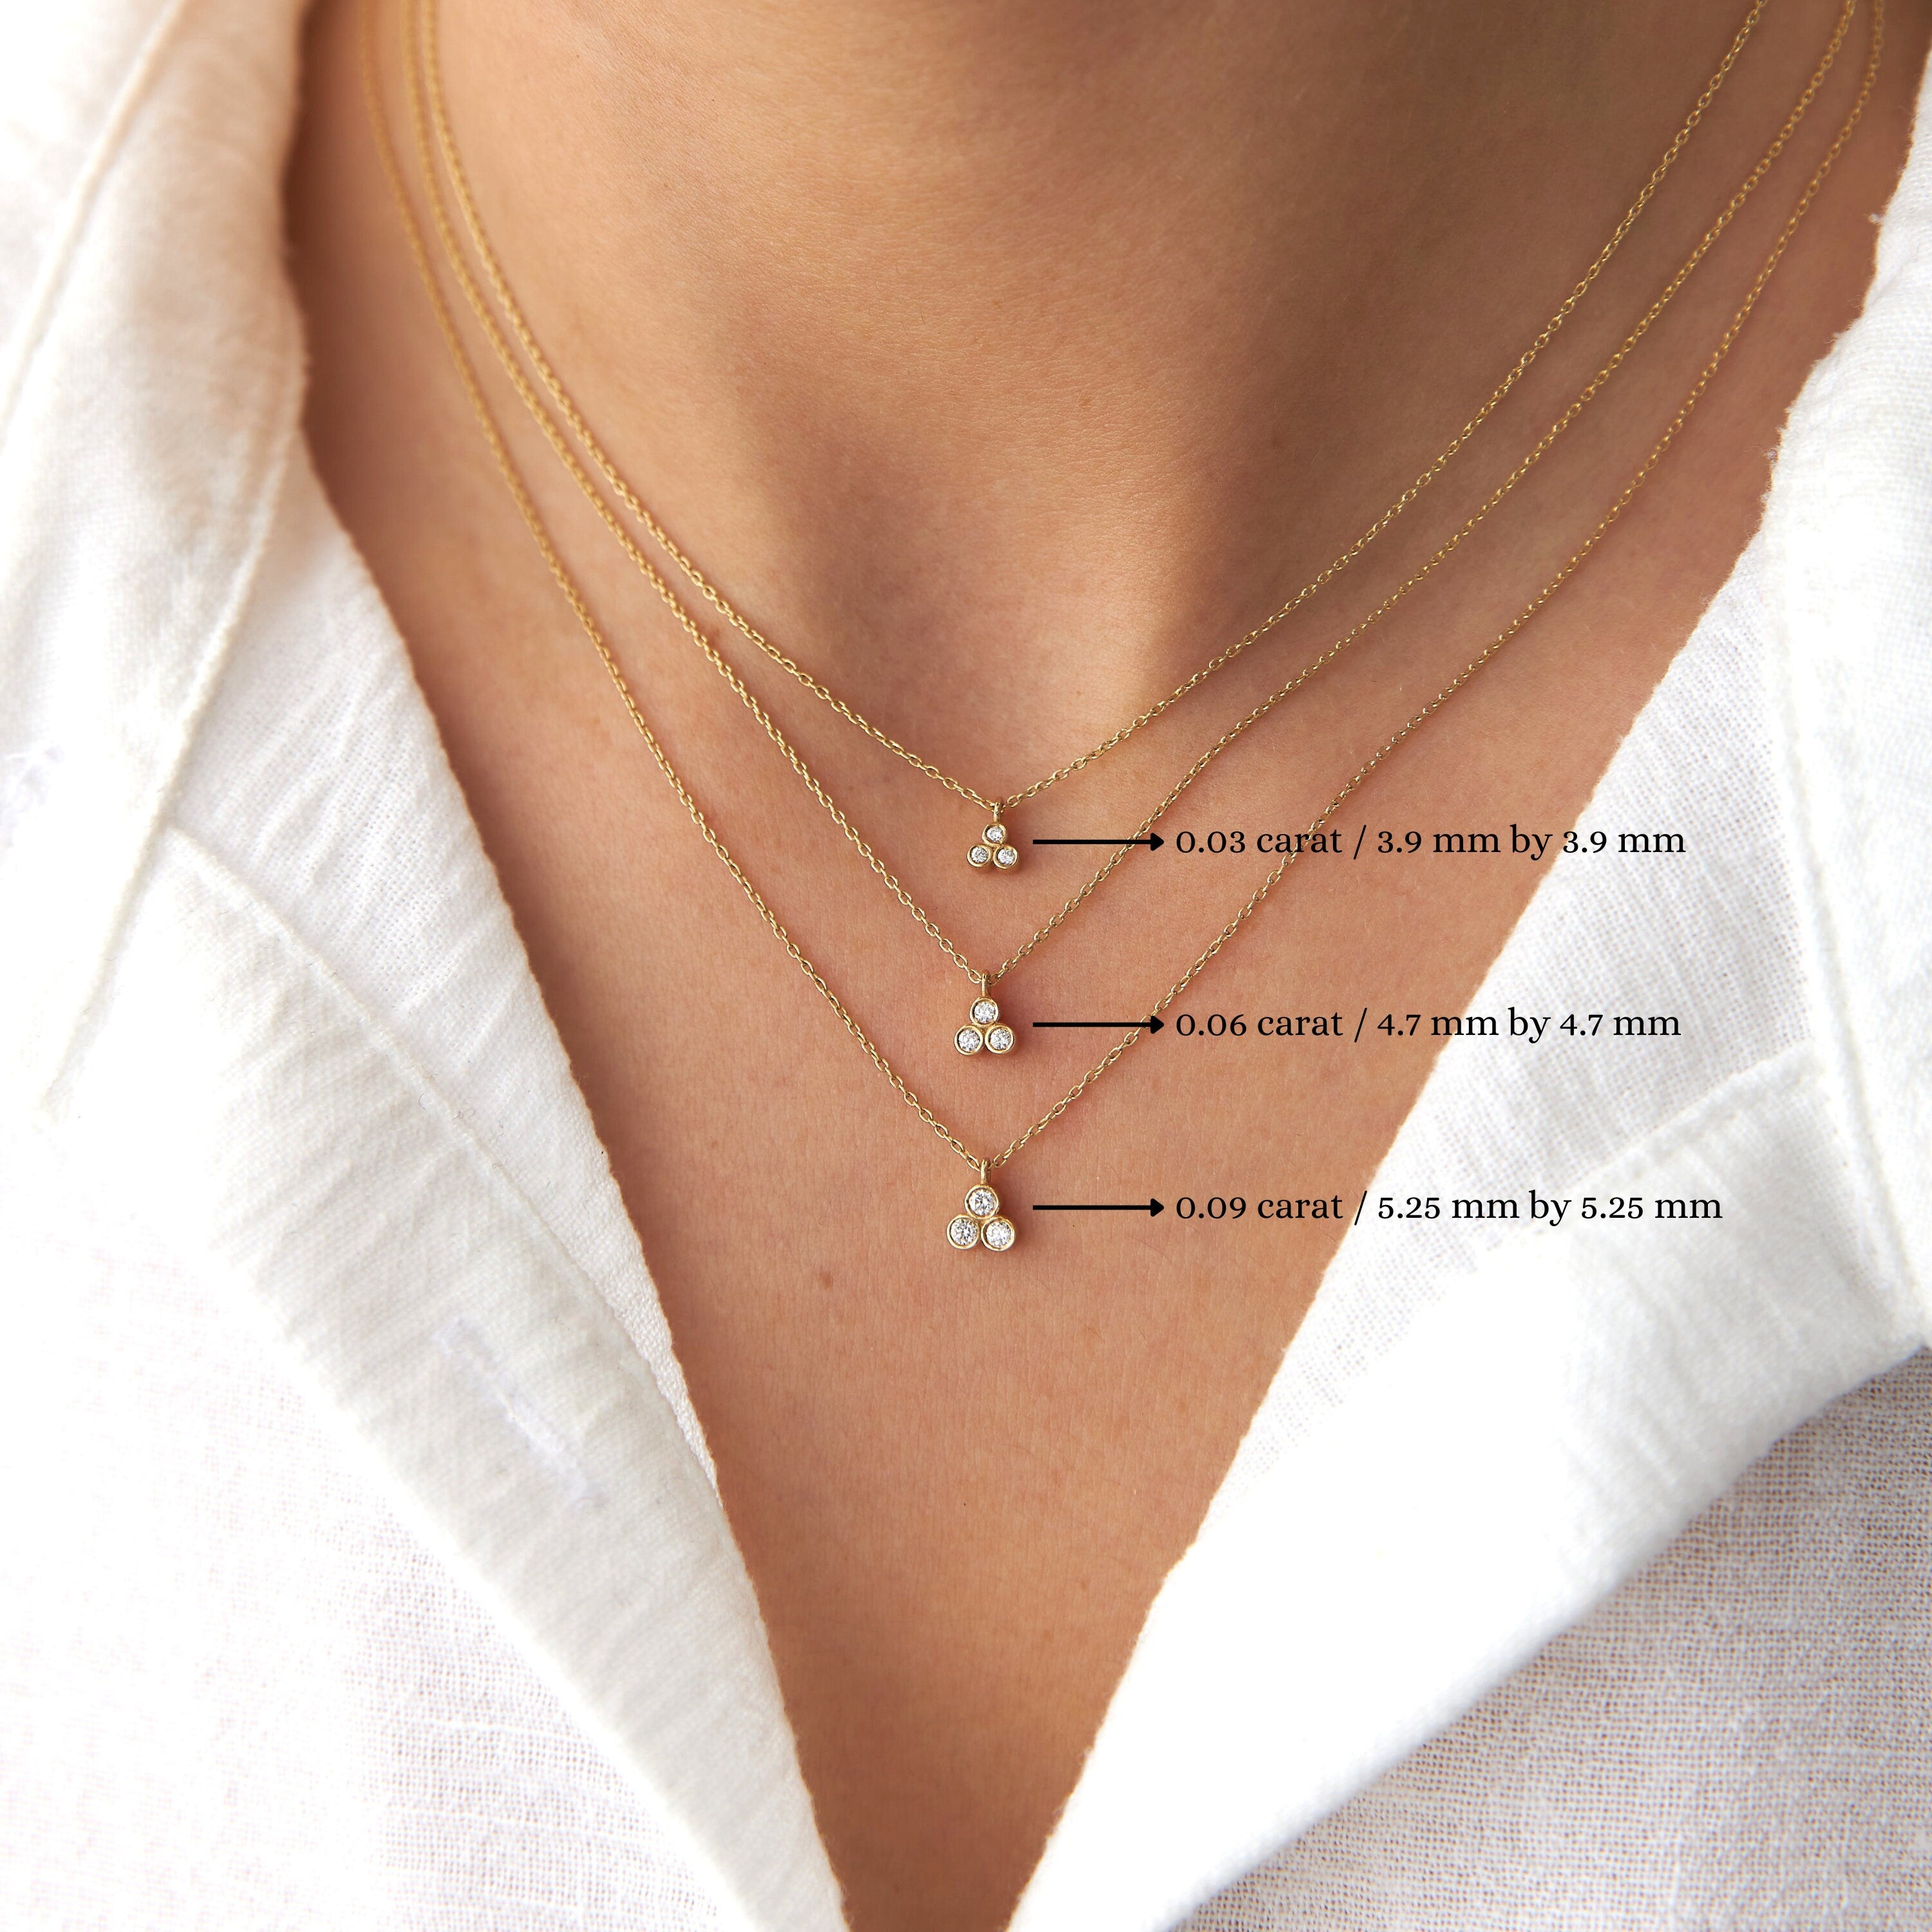 Bezel Set Three Diamond Necklace Available in 14K and 18K Gold